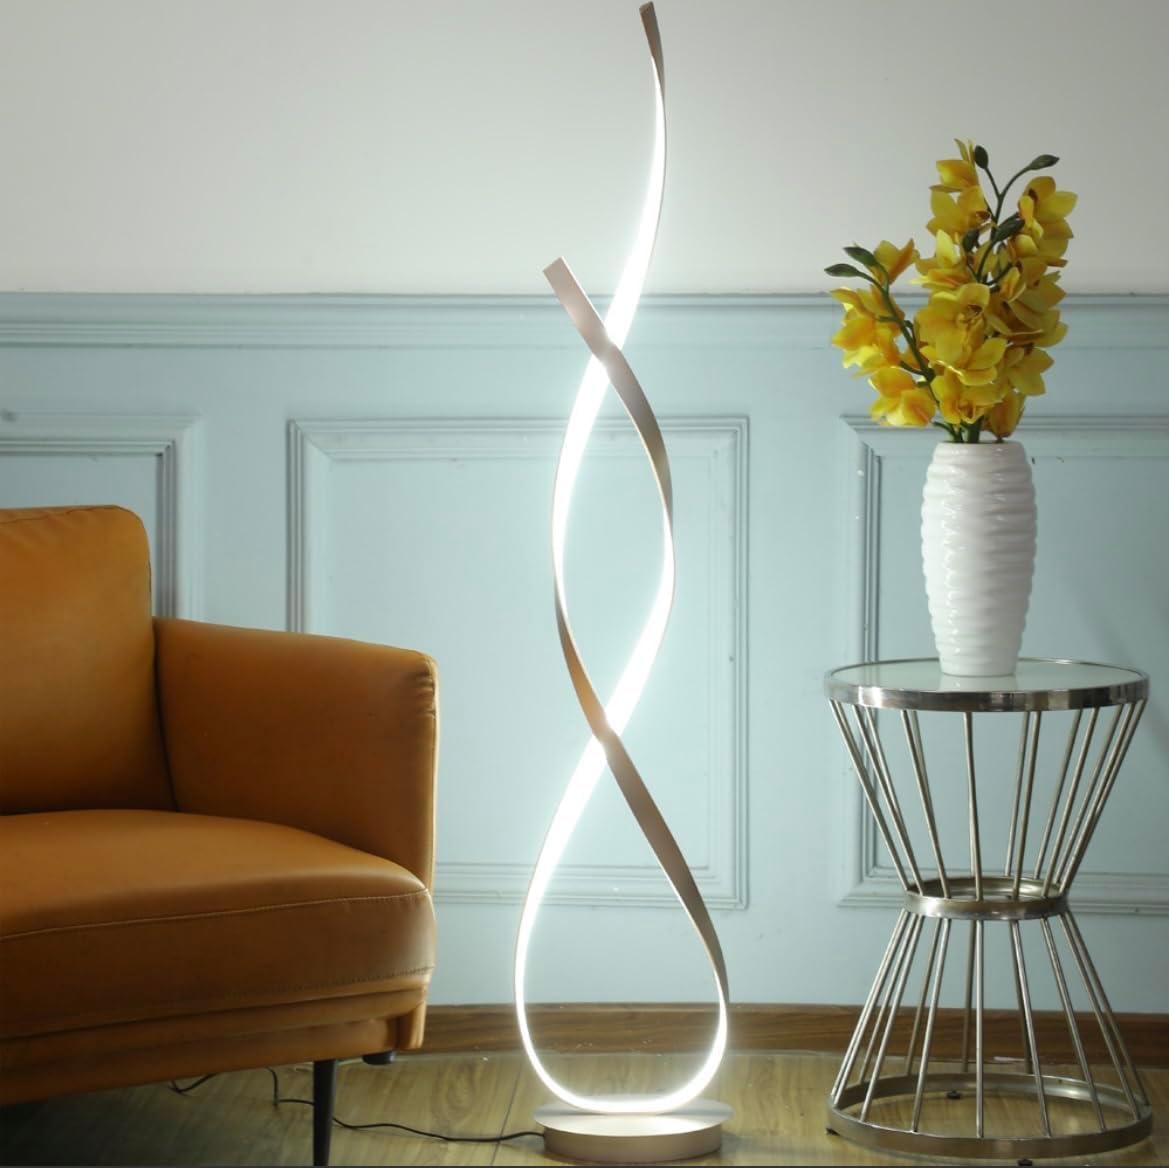  New Dimmable Twisted Restaurant Floor Lamp LED - Buy New Dimmable Twisted Floor Lamp LED in Dubai - HOCC Dubai - Baby playground outdoor - Shop baby product - Shop Pet product - shop home decor and lighting in Dubai - HOCC Dubai - Baby playground outddo